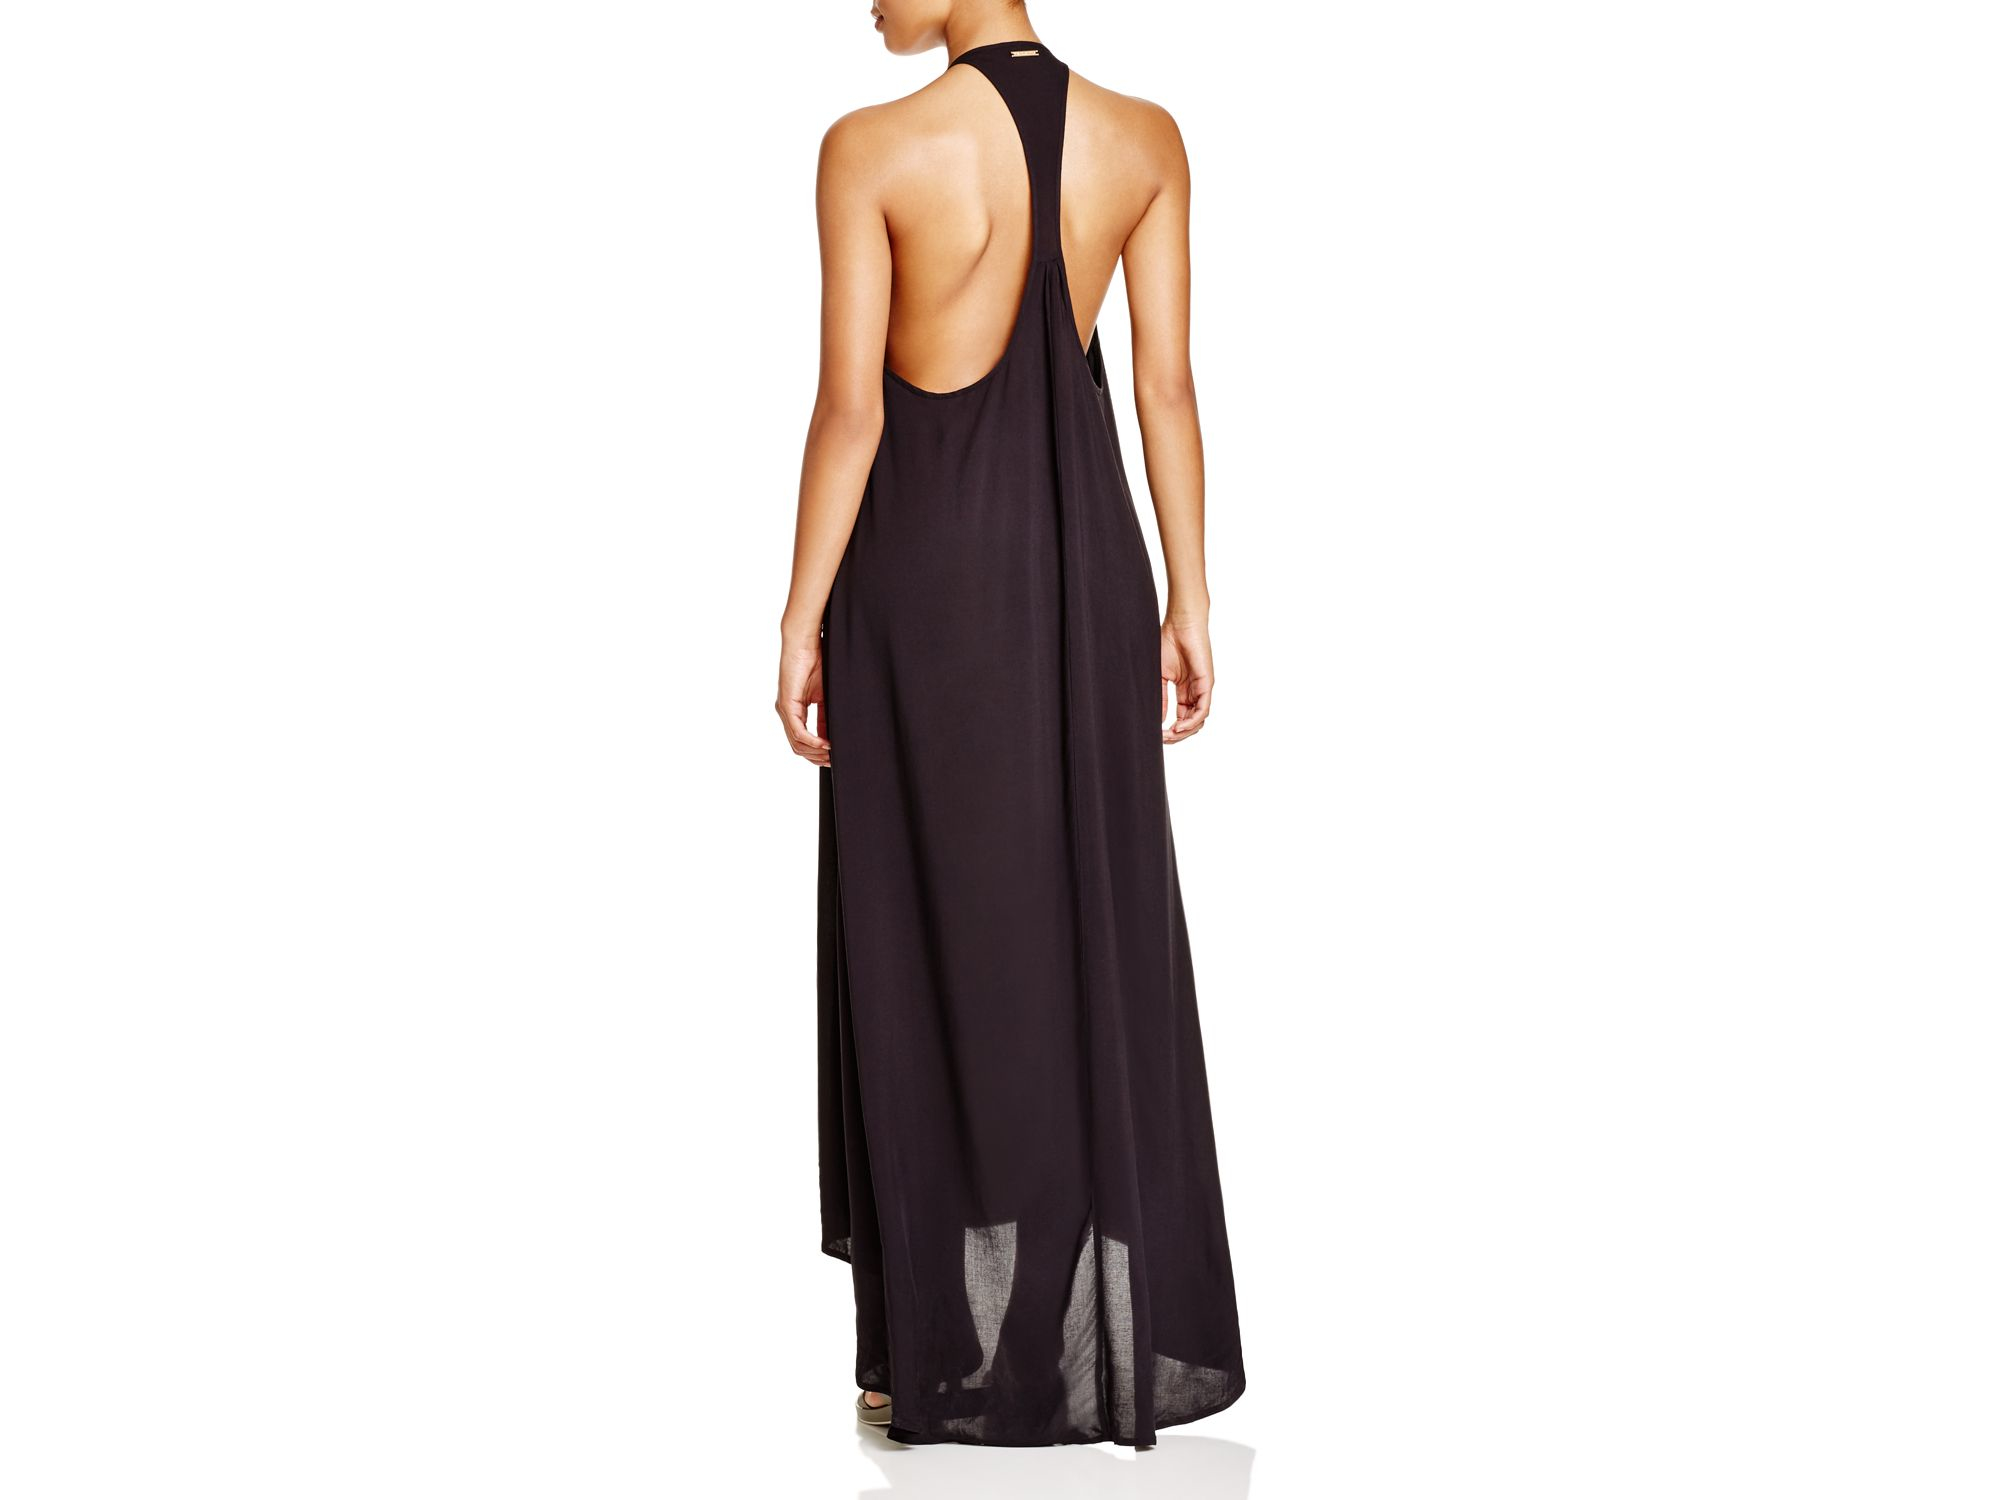 Lyst - Vince Camuto Racerback Maxi Dress Swim Cover Up in Black